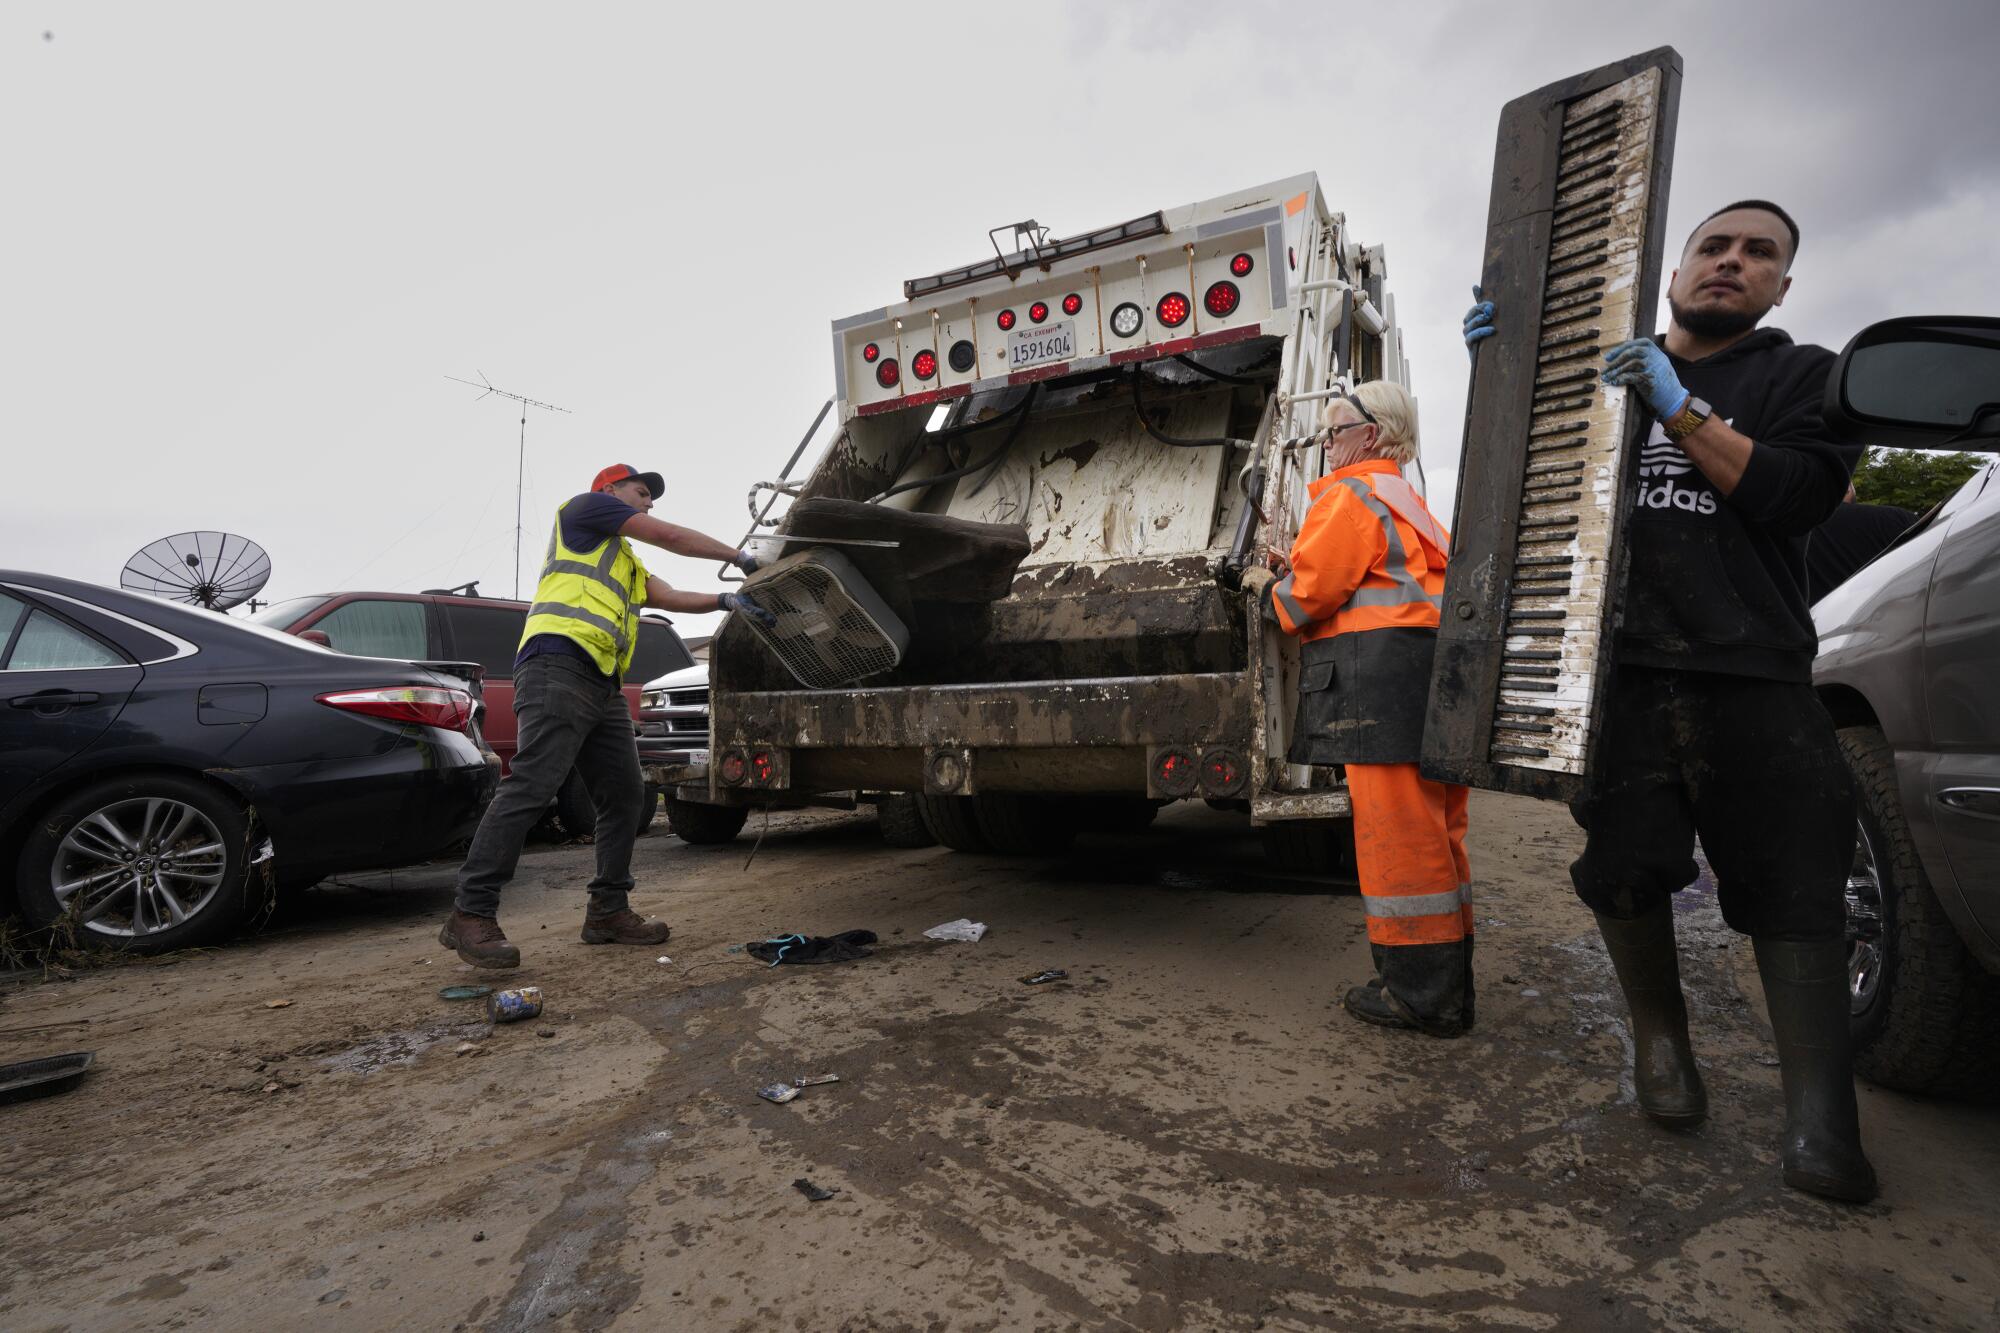 Cesar Sanchez, 28, carries a keyboard to landfill truck.